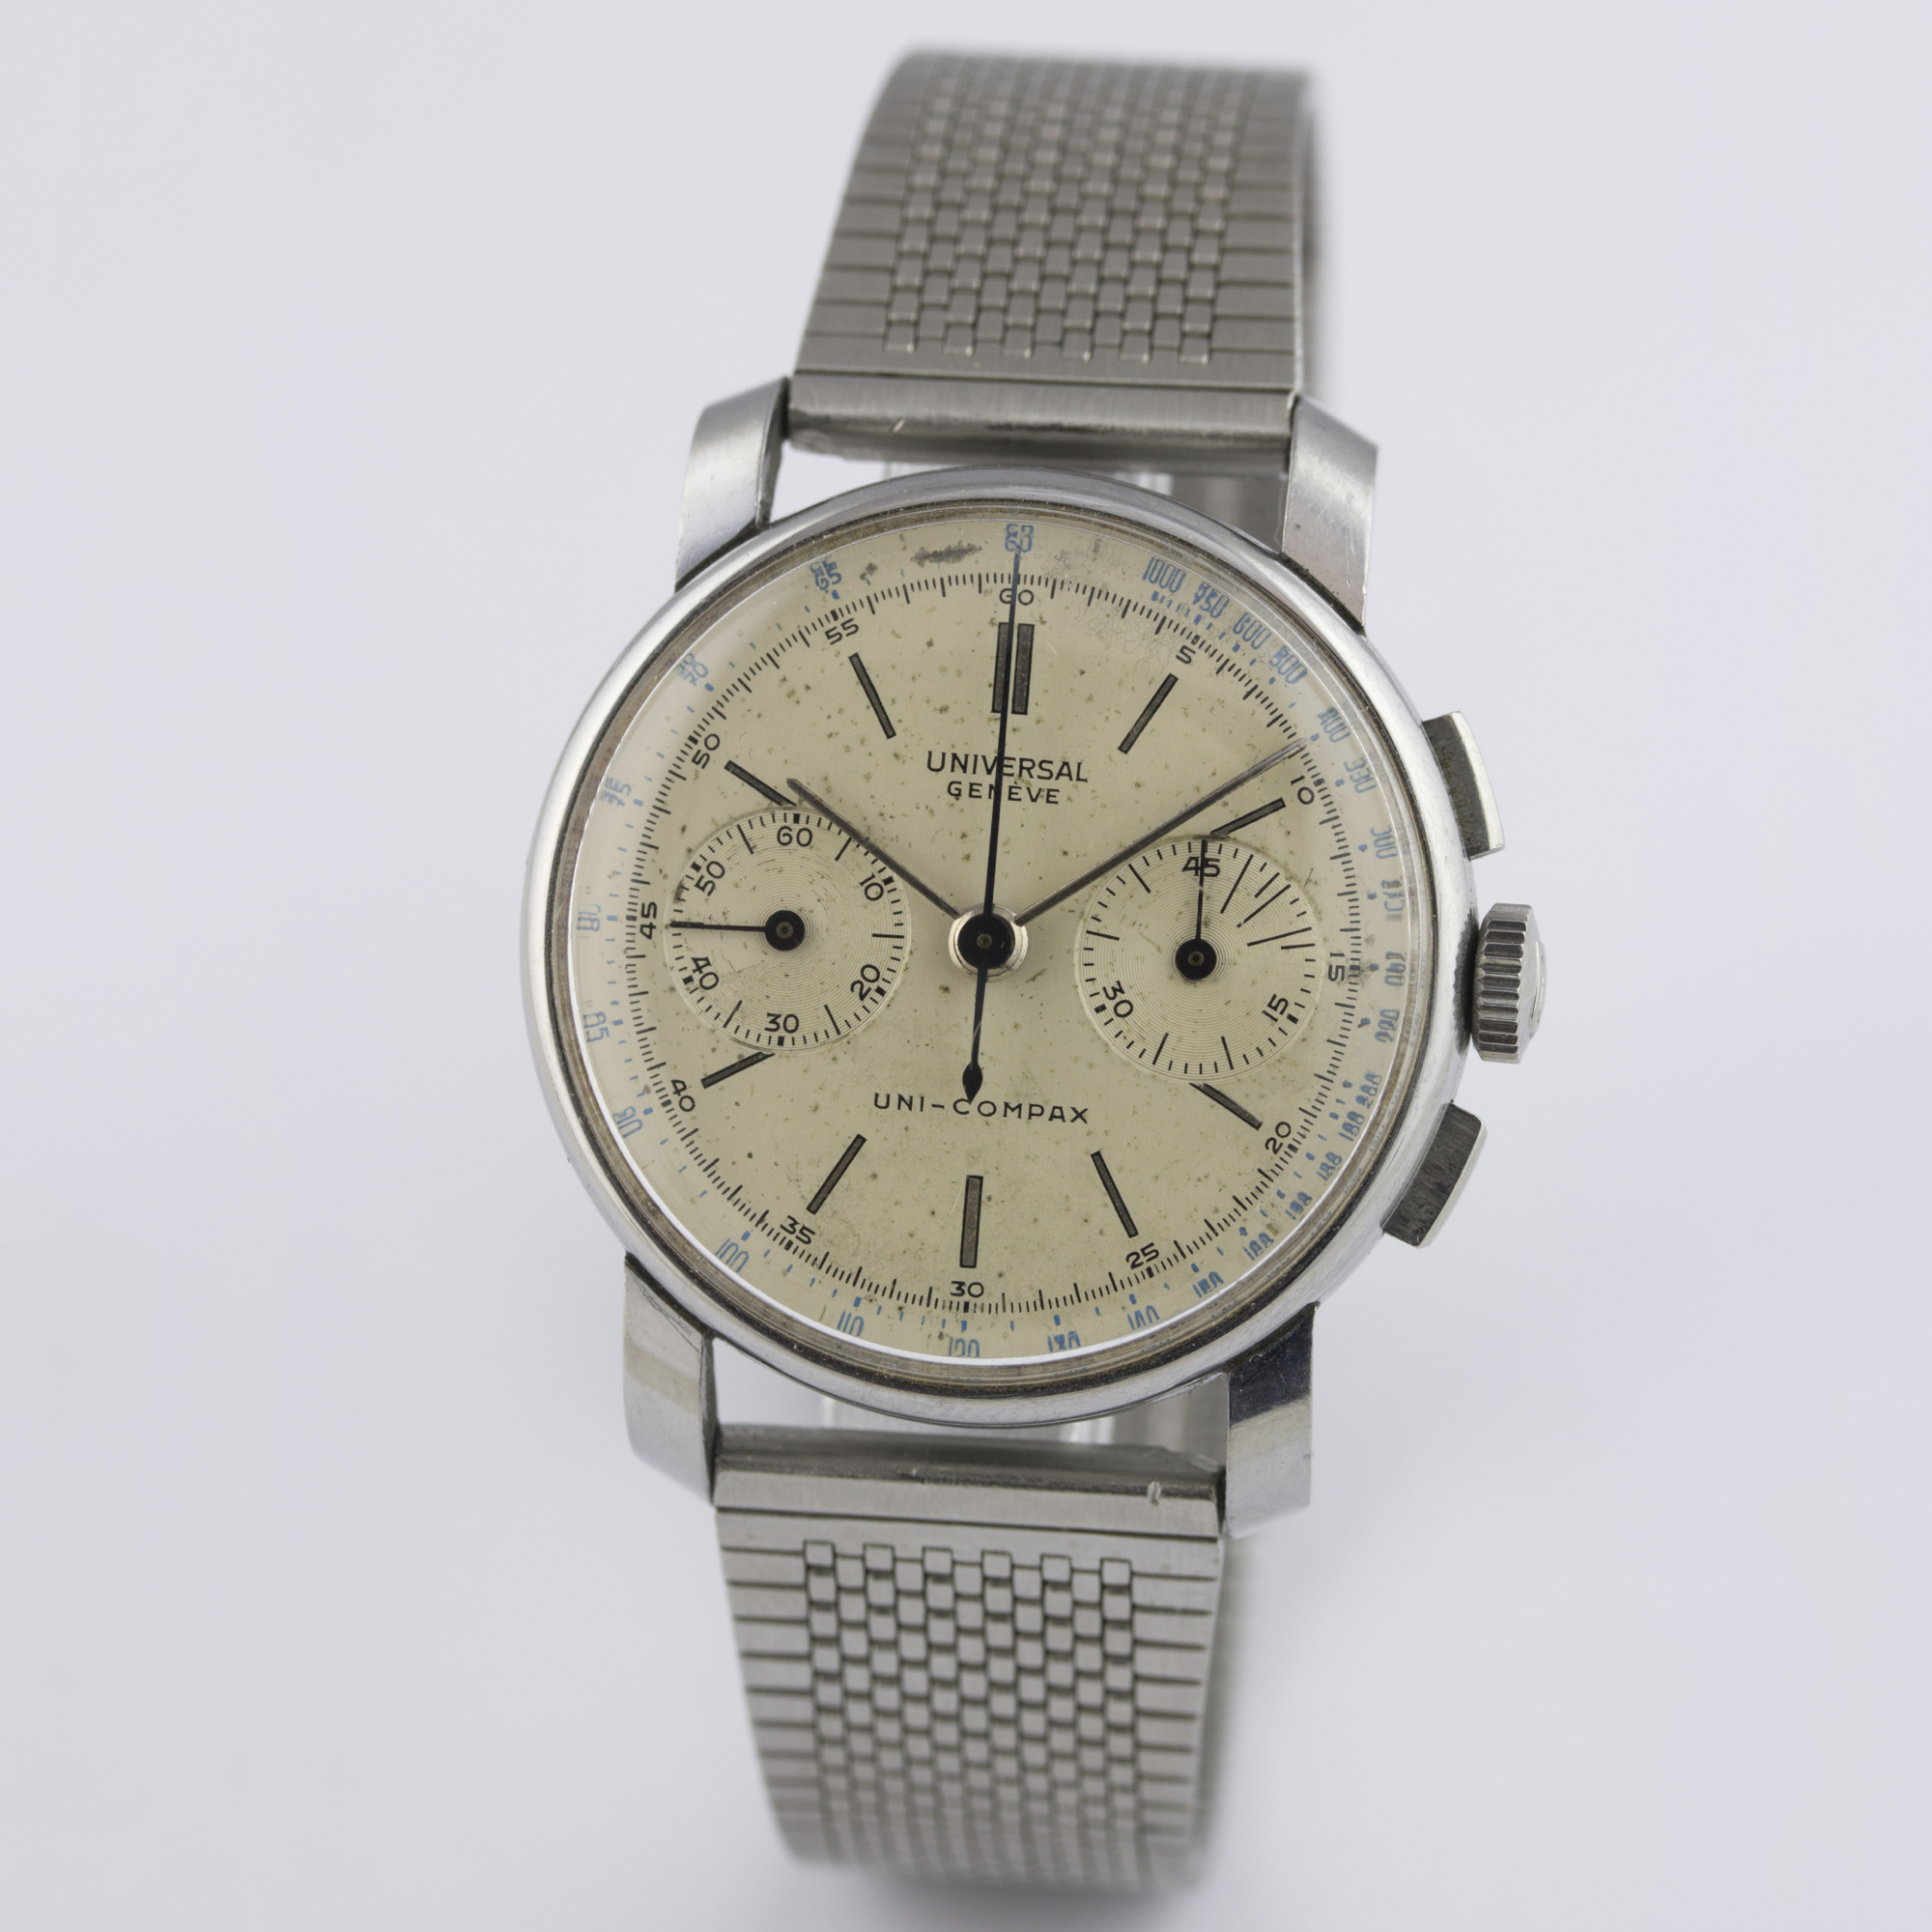 A GENTLEMAN'S STAINLESS STEEL UNIVERSAL GENEVE UNI COMPAX CHRONOGRAPH WRIST WATCH CIRCA 1940s D: - Image 2 of 8